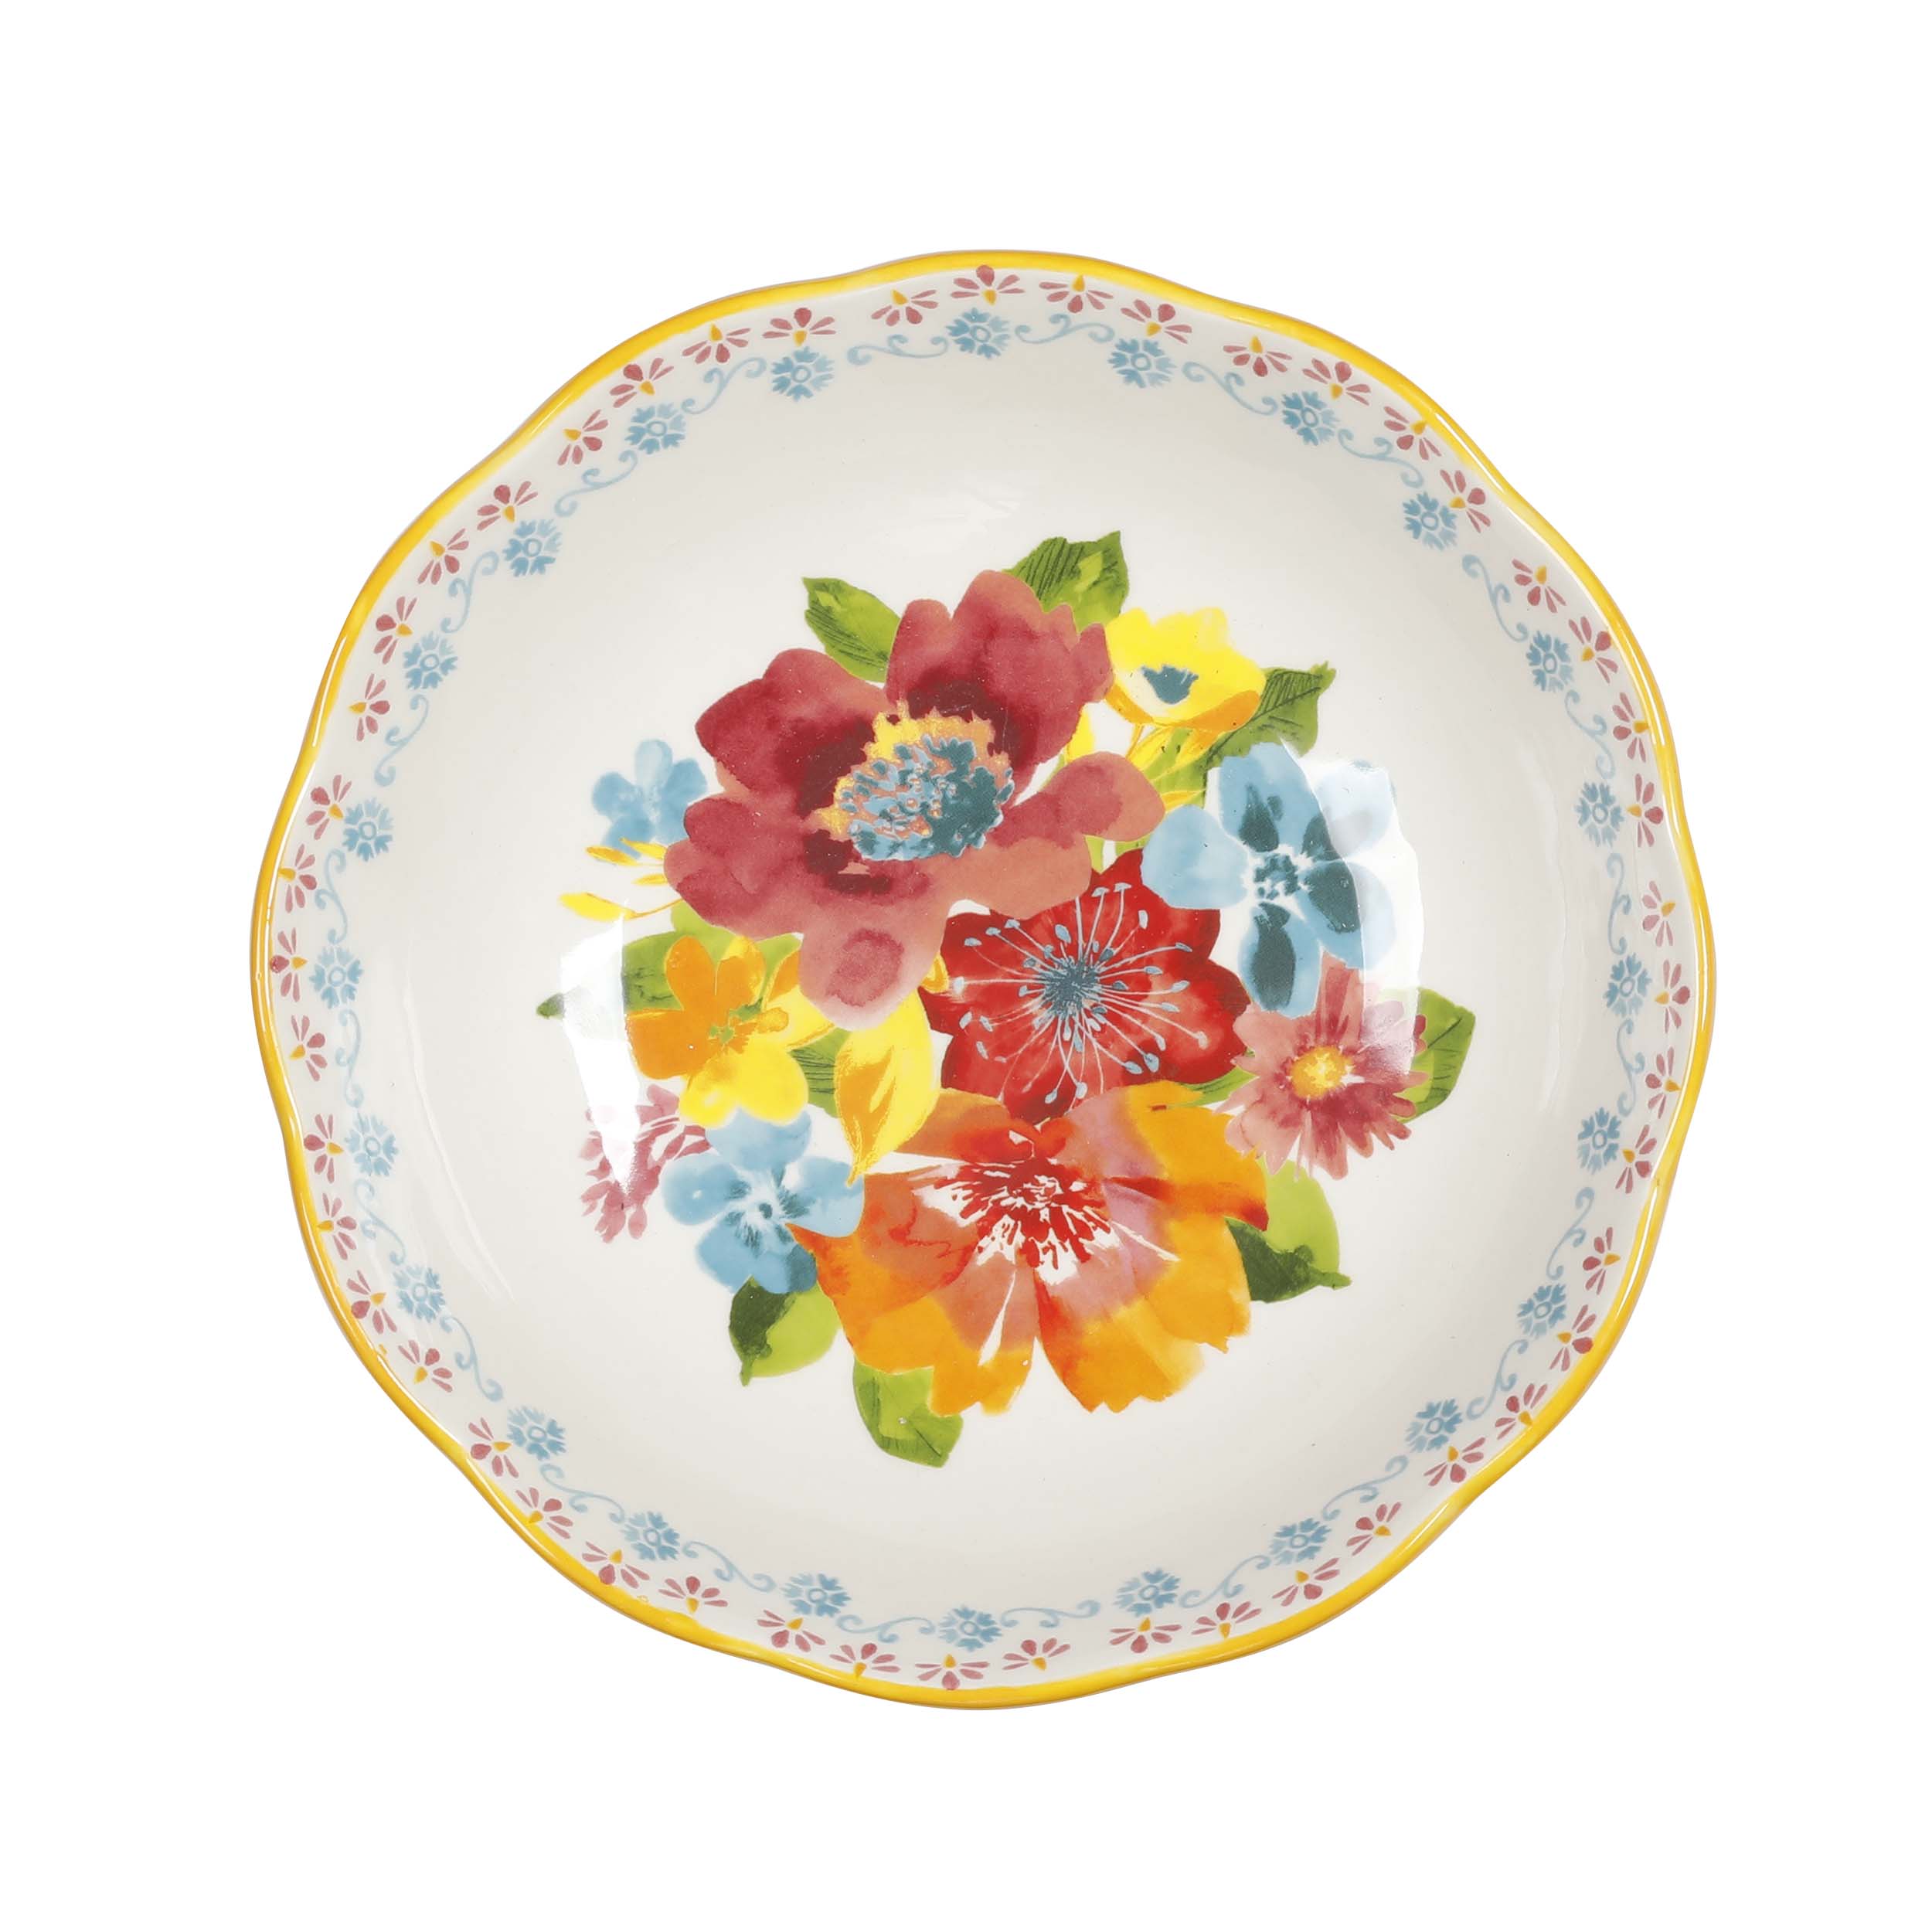 The Pioneer Woman Floral Medley Assorted Ceramic 7.5-inch Pasta Bowls, 3-Pack - image 3 of 9